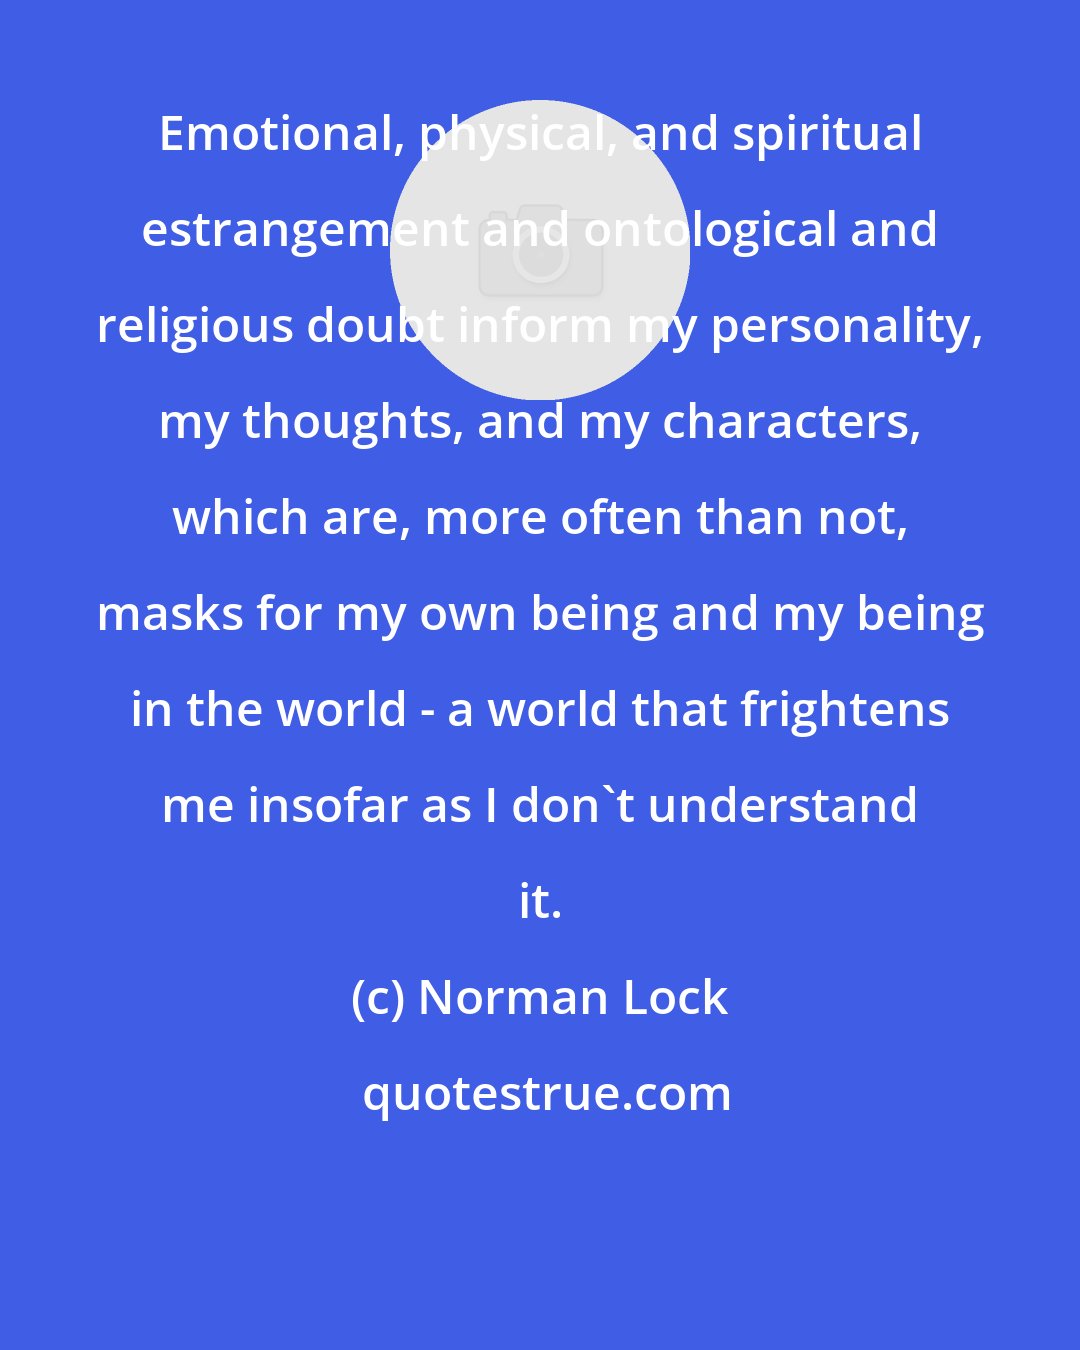 Norman Lock: Emotional, physical, and spiritual estrangement and ontological and religious doubt inform my personality, my thoughts, and my characters, which are, more often than not, masks for my own being and my being in the world - a world that frightens me insofar as I don't understand it.